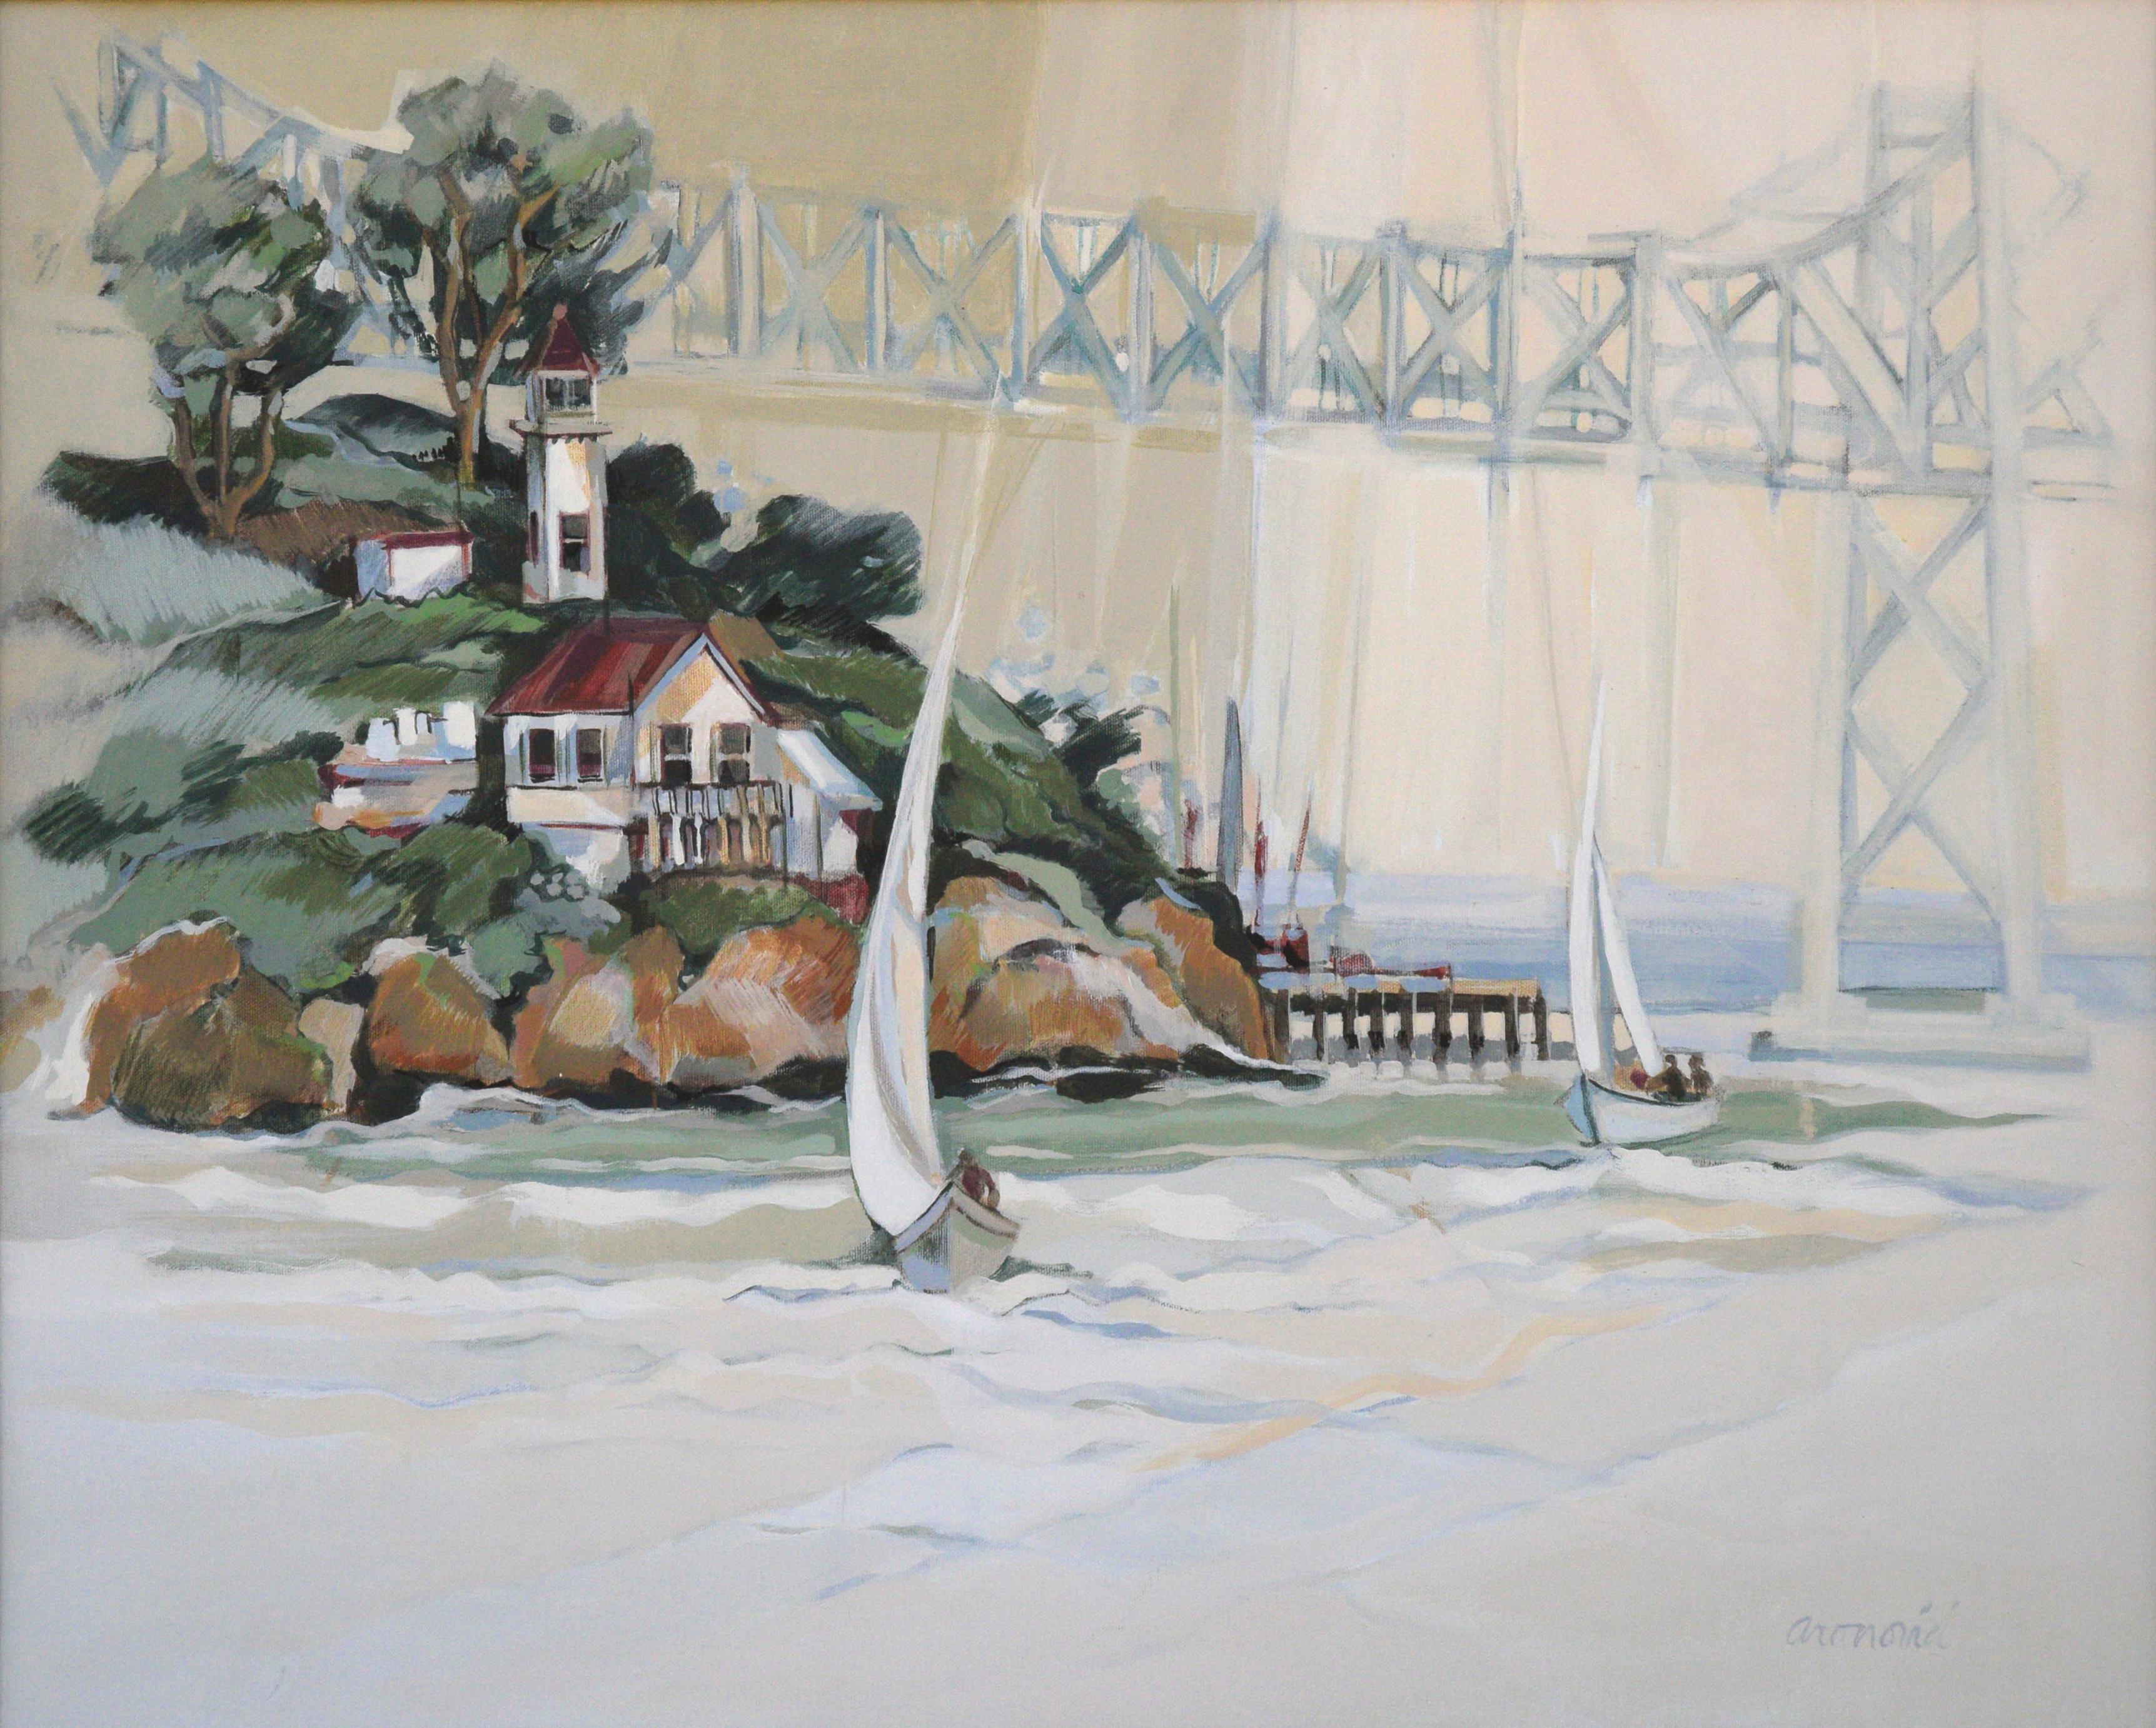 Sail Boats and Calm Water Under West Coast Bridge - Painting by Merlyn Smith Aronovici Moreno